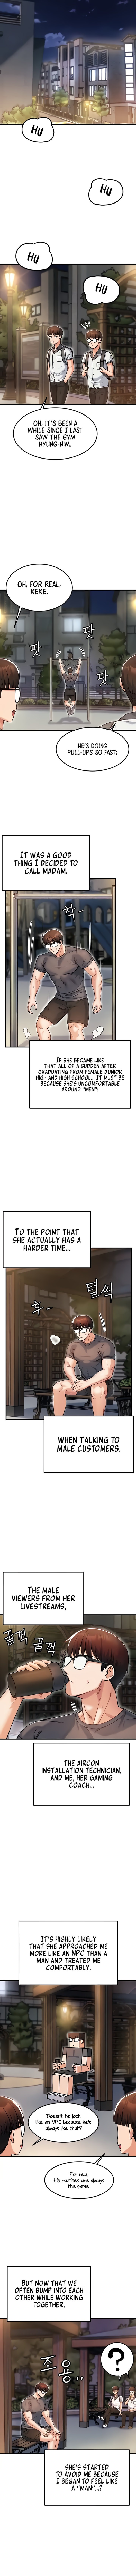 Kangcheol’s Bosses - Chapter 10 Page 4